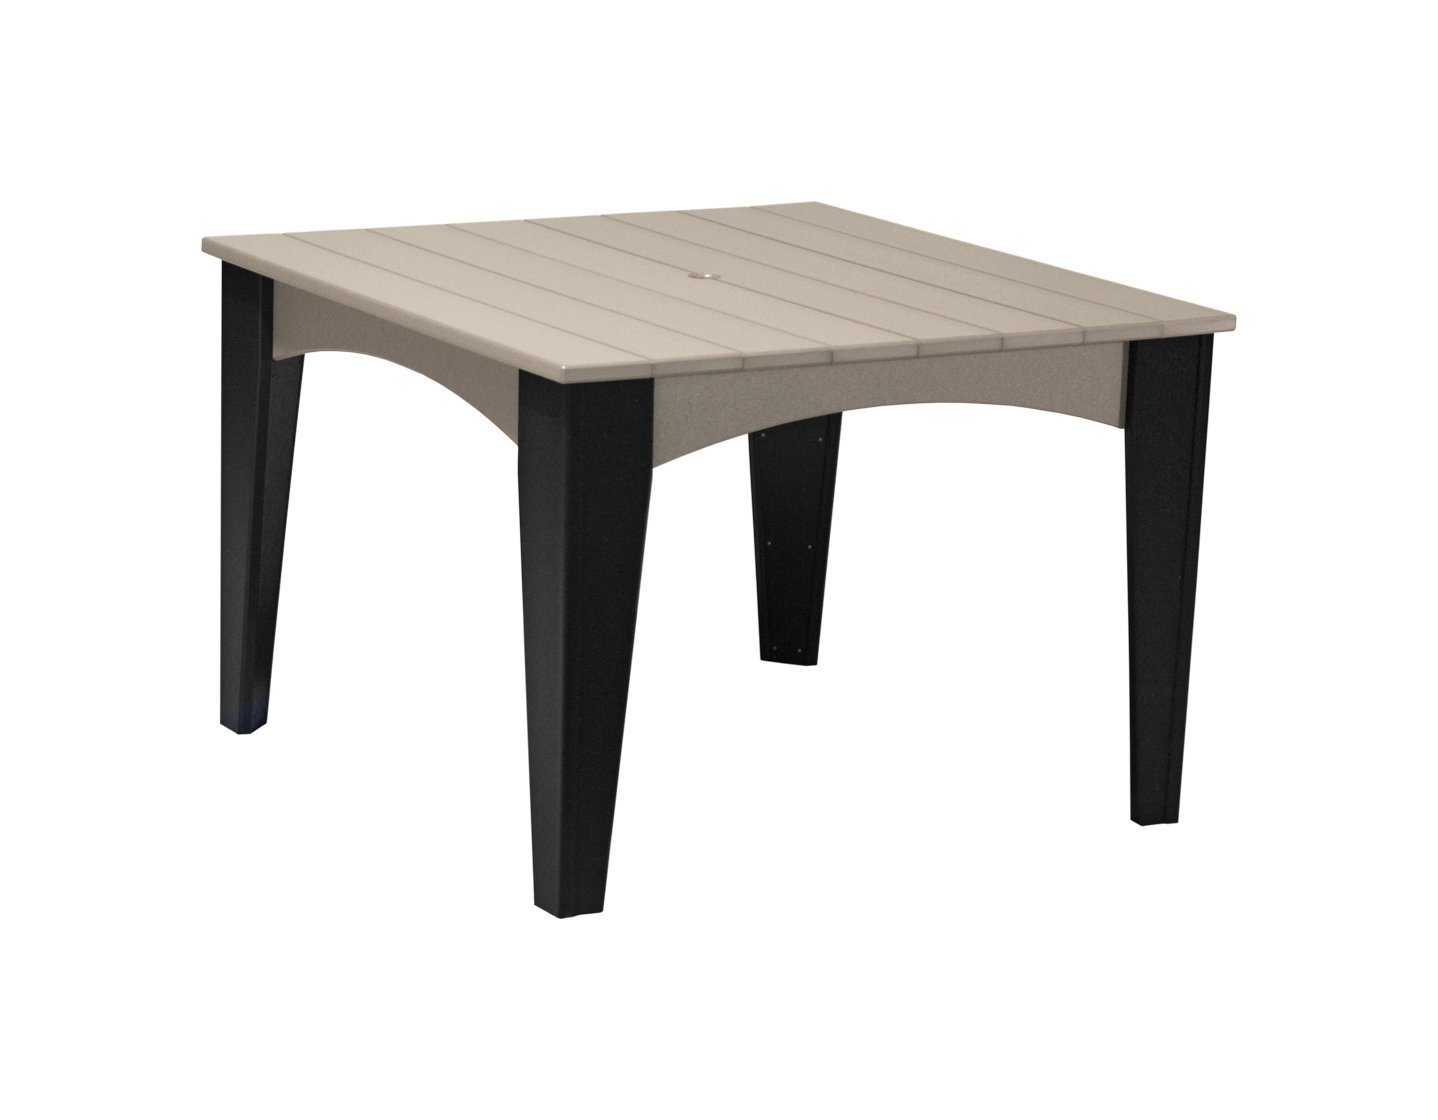 Luxcraft PolyTuf 44" Square Dining Table